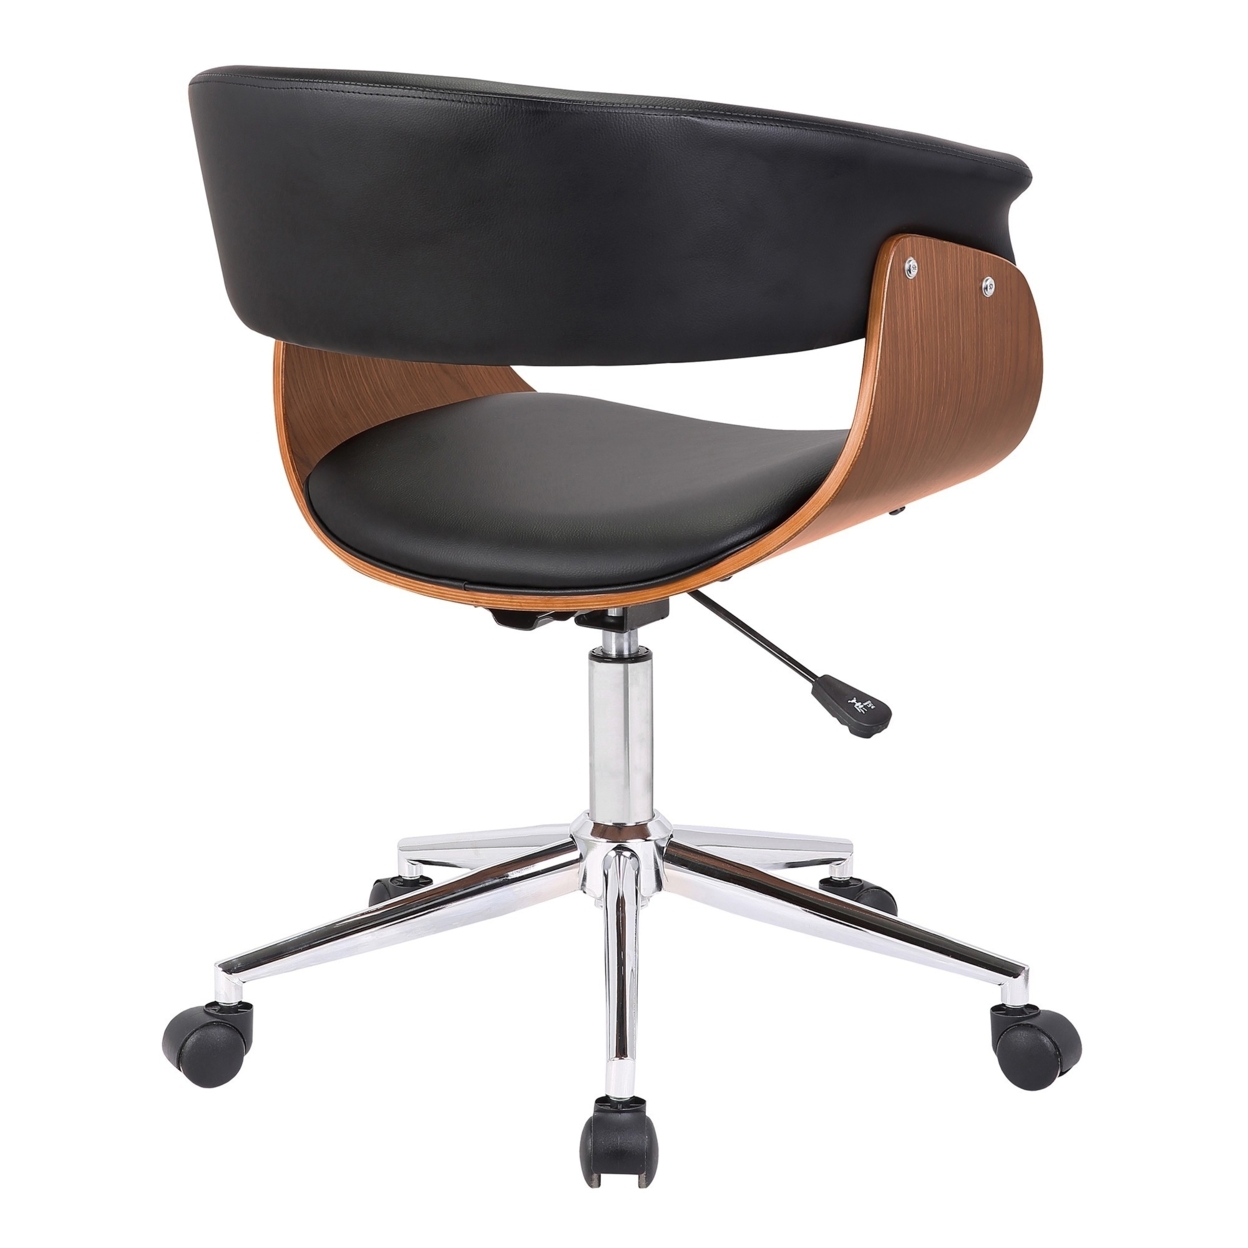 Curved Faux Leather Office Chair With Wooden Support And Star Base, Black- Saltoro Sherpi